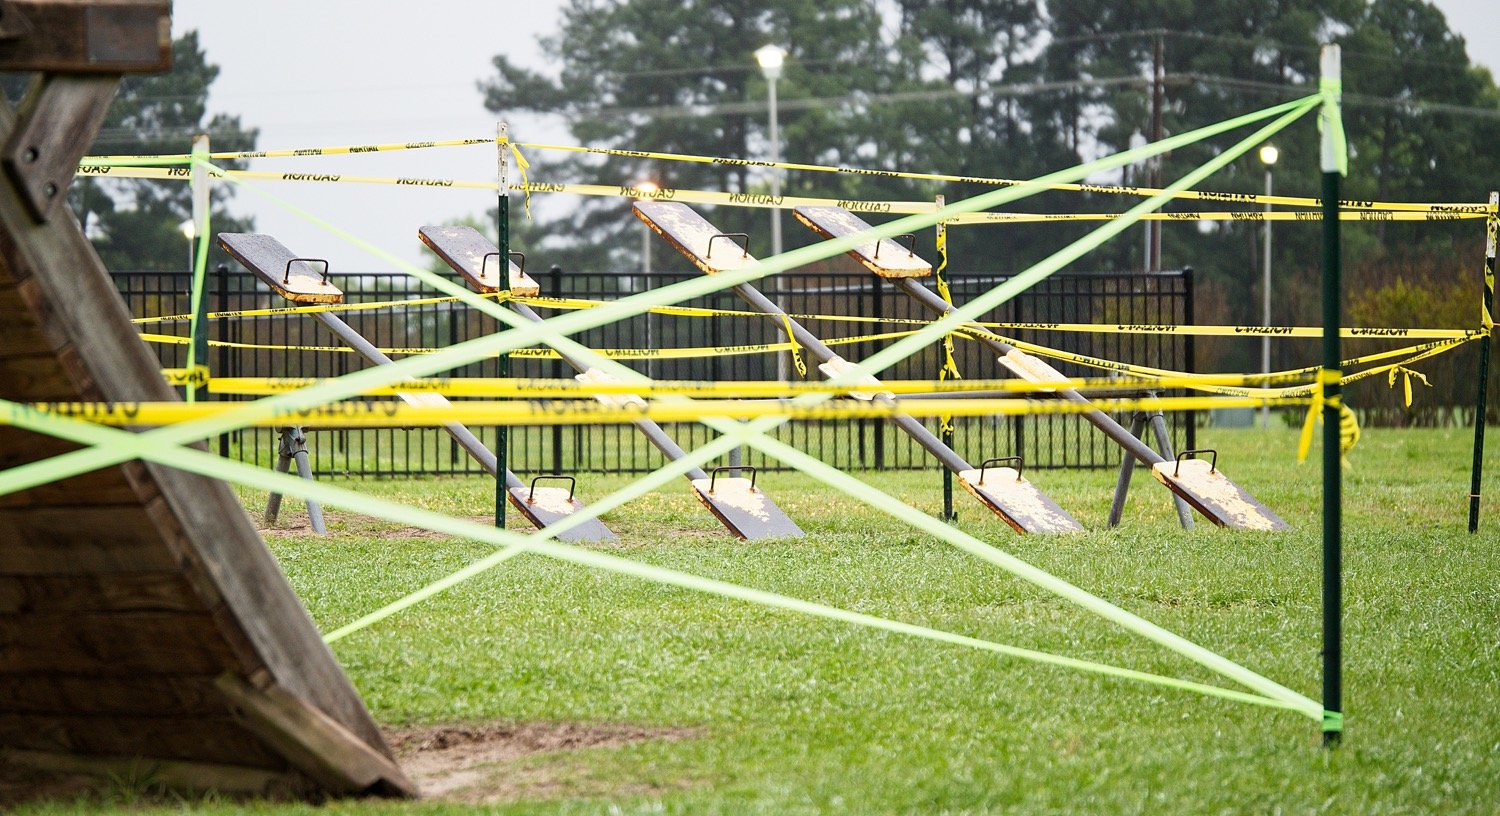 In early April, playground equipment at the Mineola Civic Center was taped off, since early preventative measures focused on coronavirus spread via contact as much as airborne. [you may buy this photo]